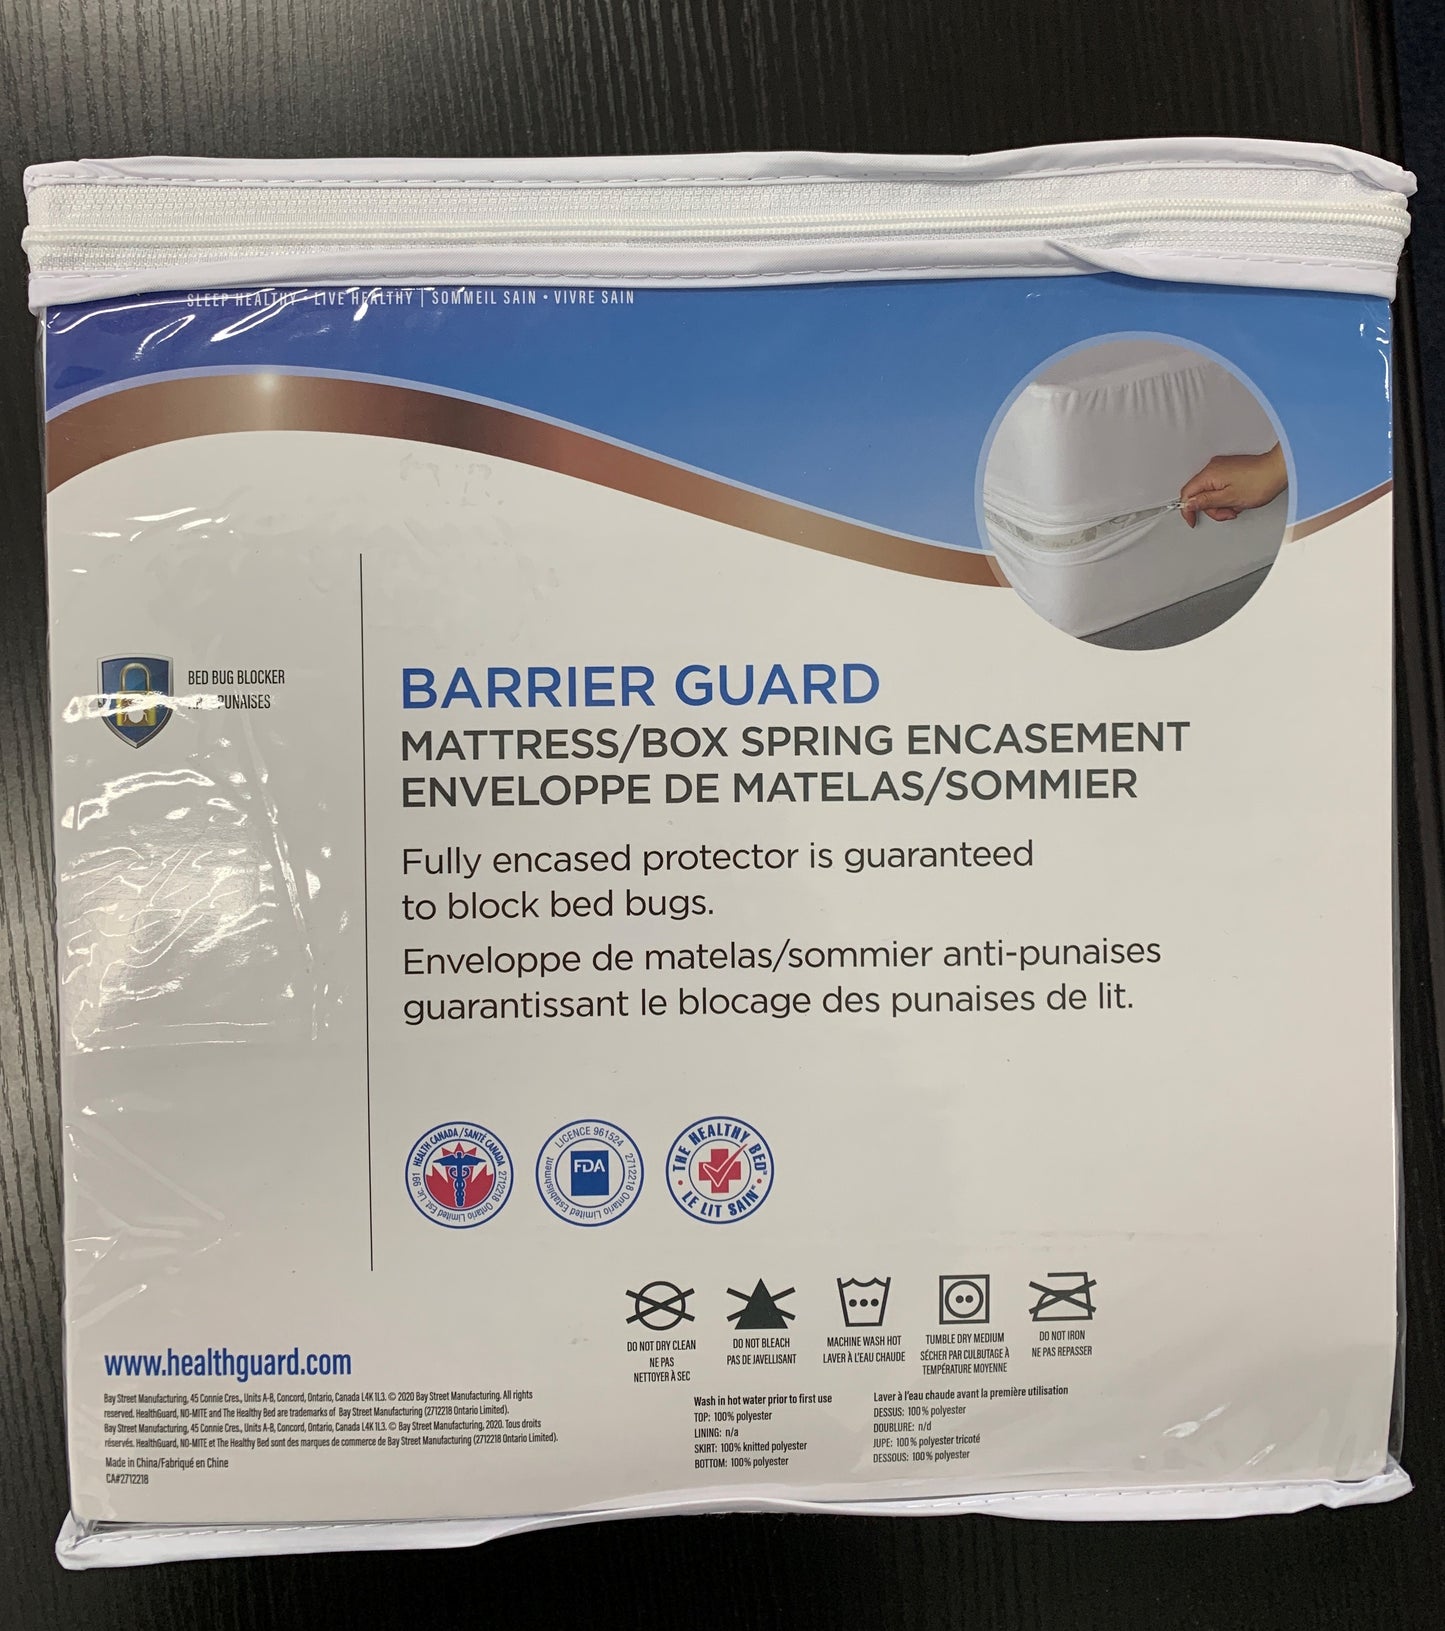 QUEEN SIZE- (HEALTHGUARD BARRIER GUARD)- BED BUG COVER